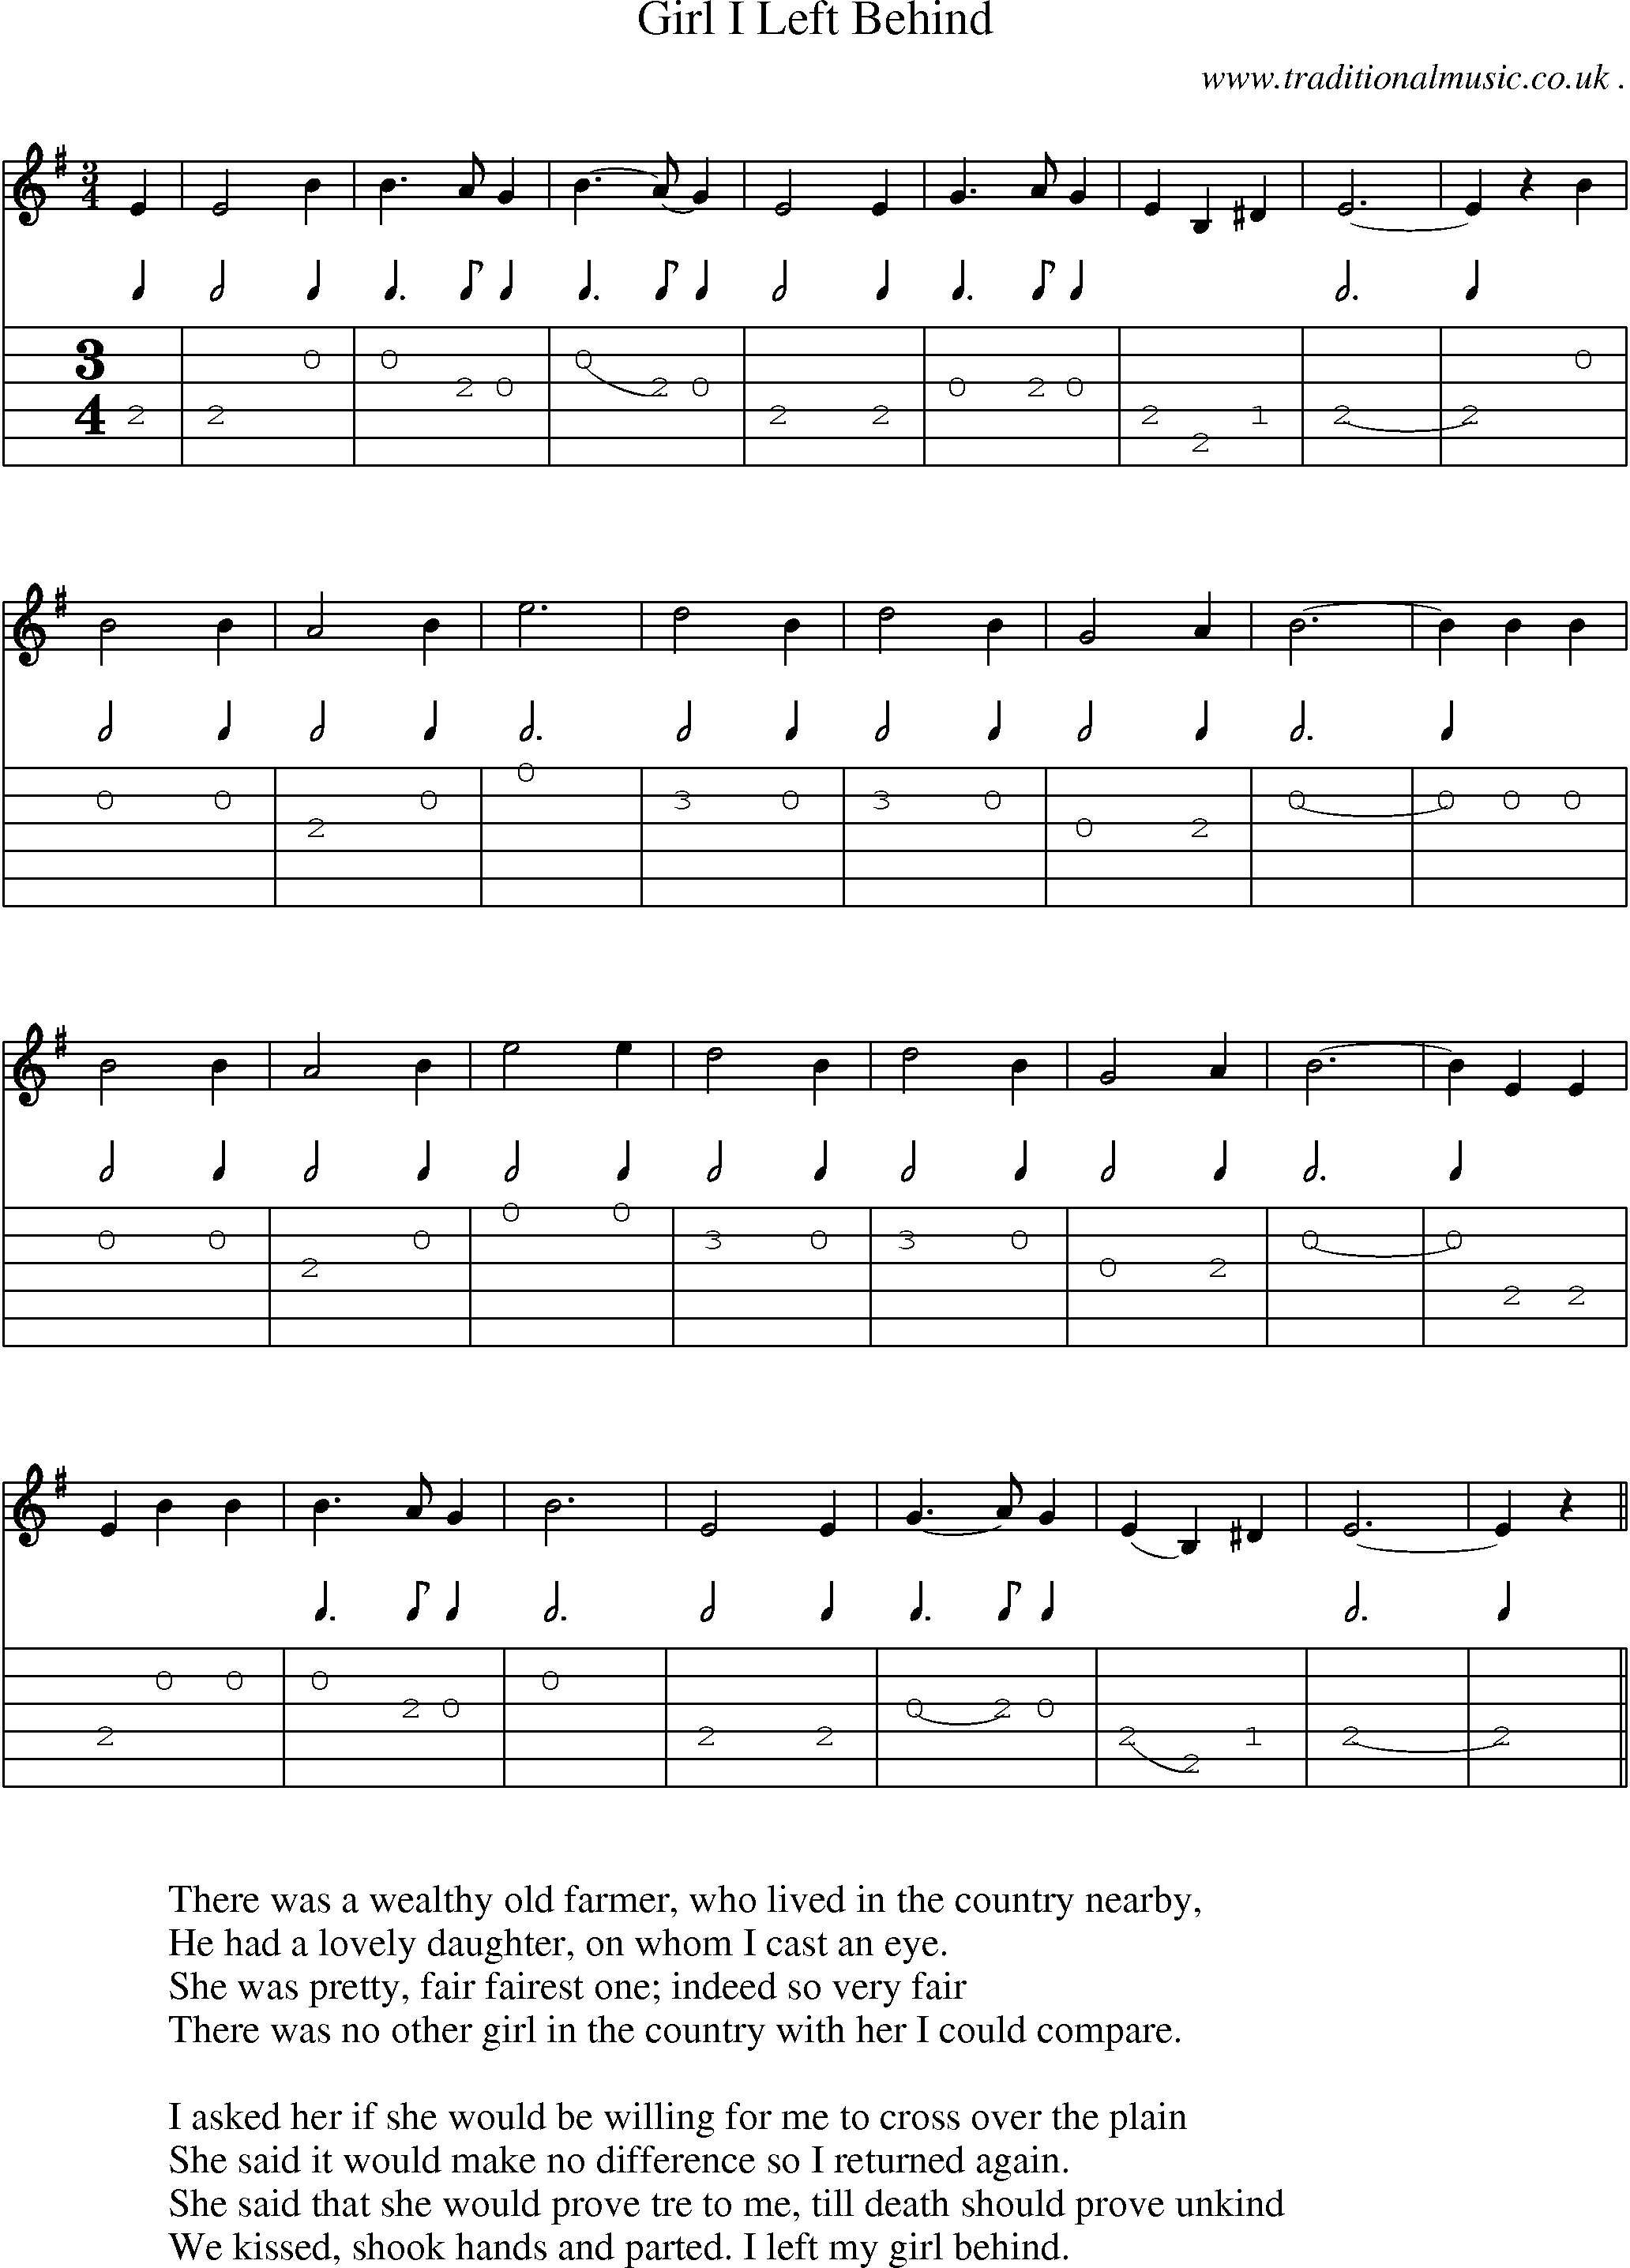 Sheet-Music and Guitar Tabs for Girl I Left Behind